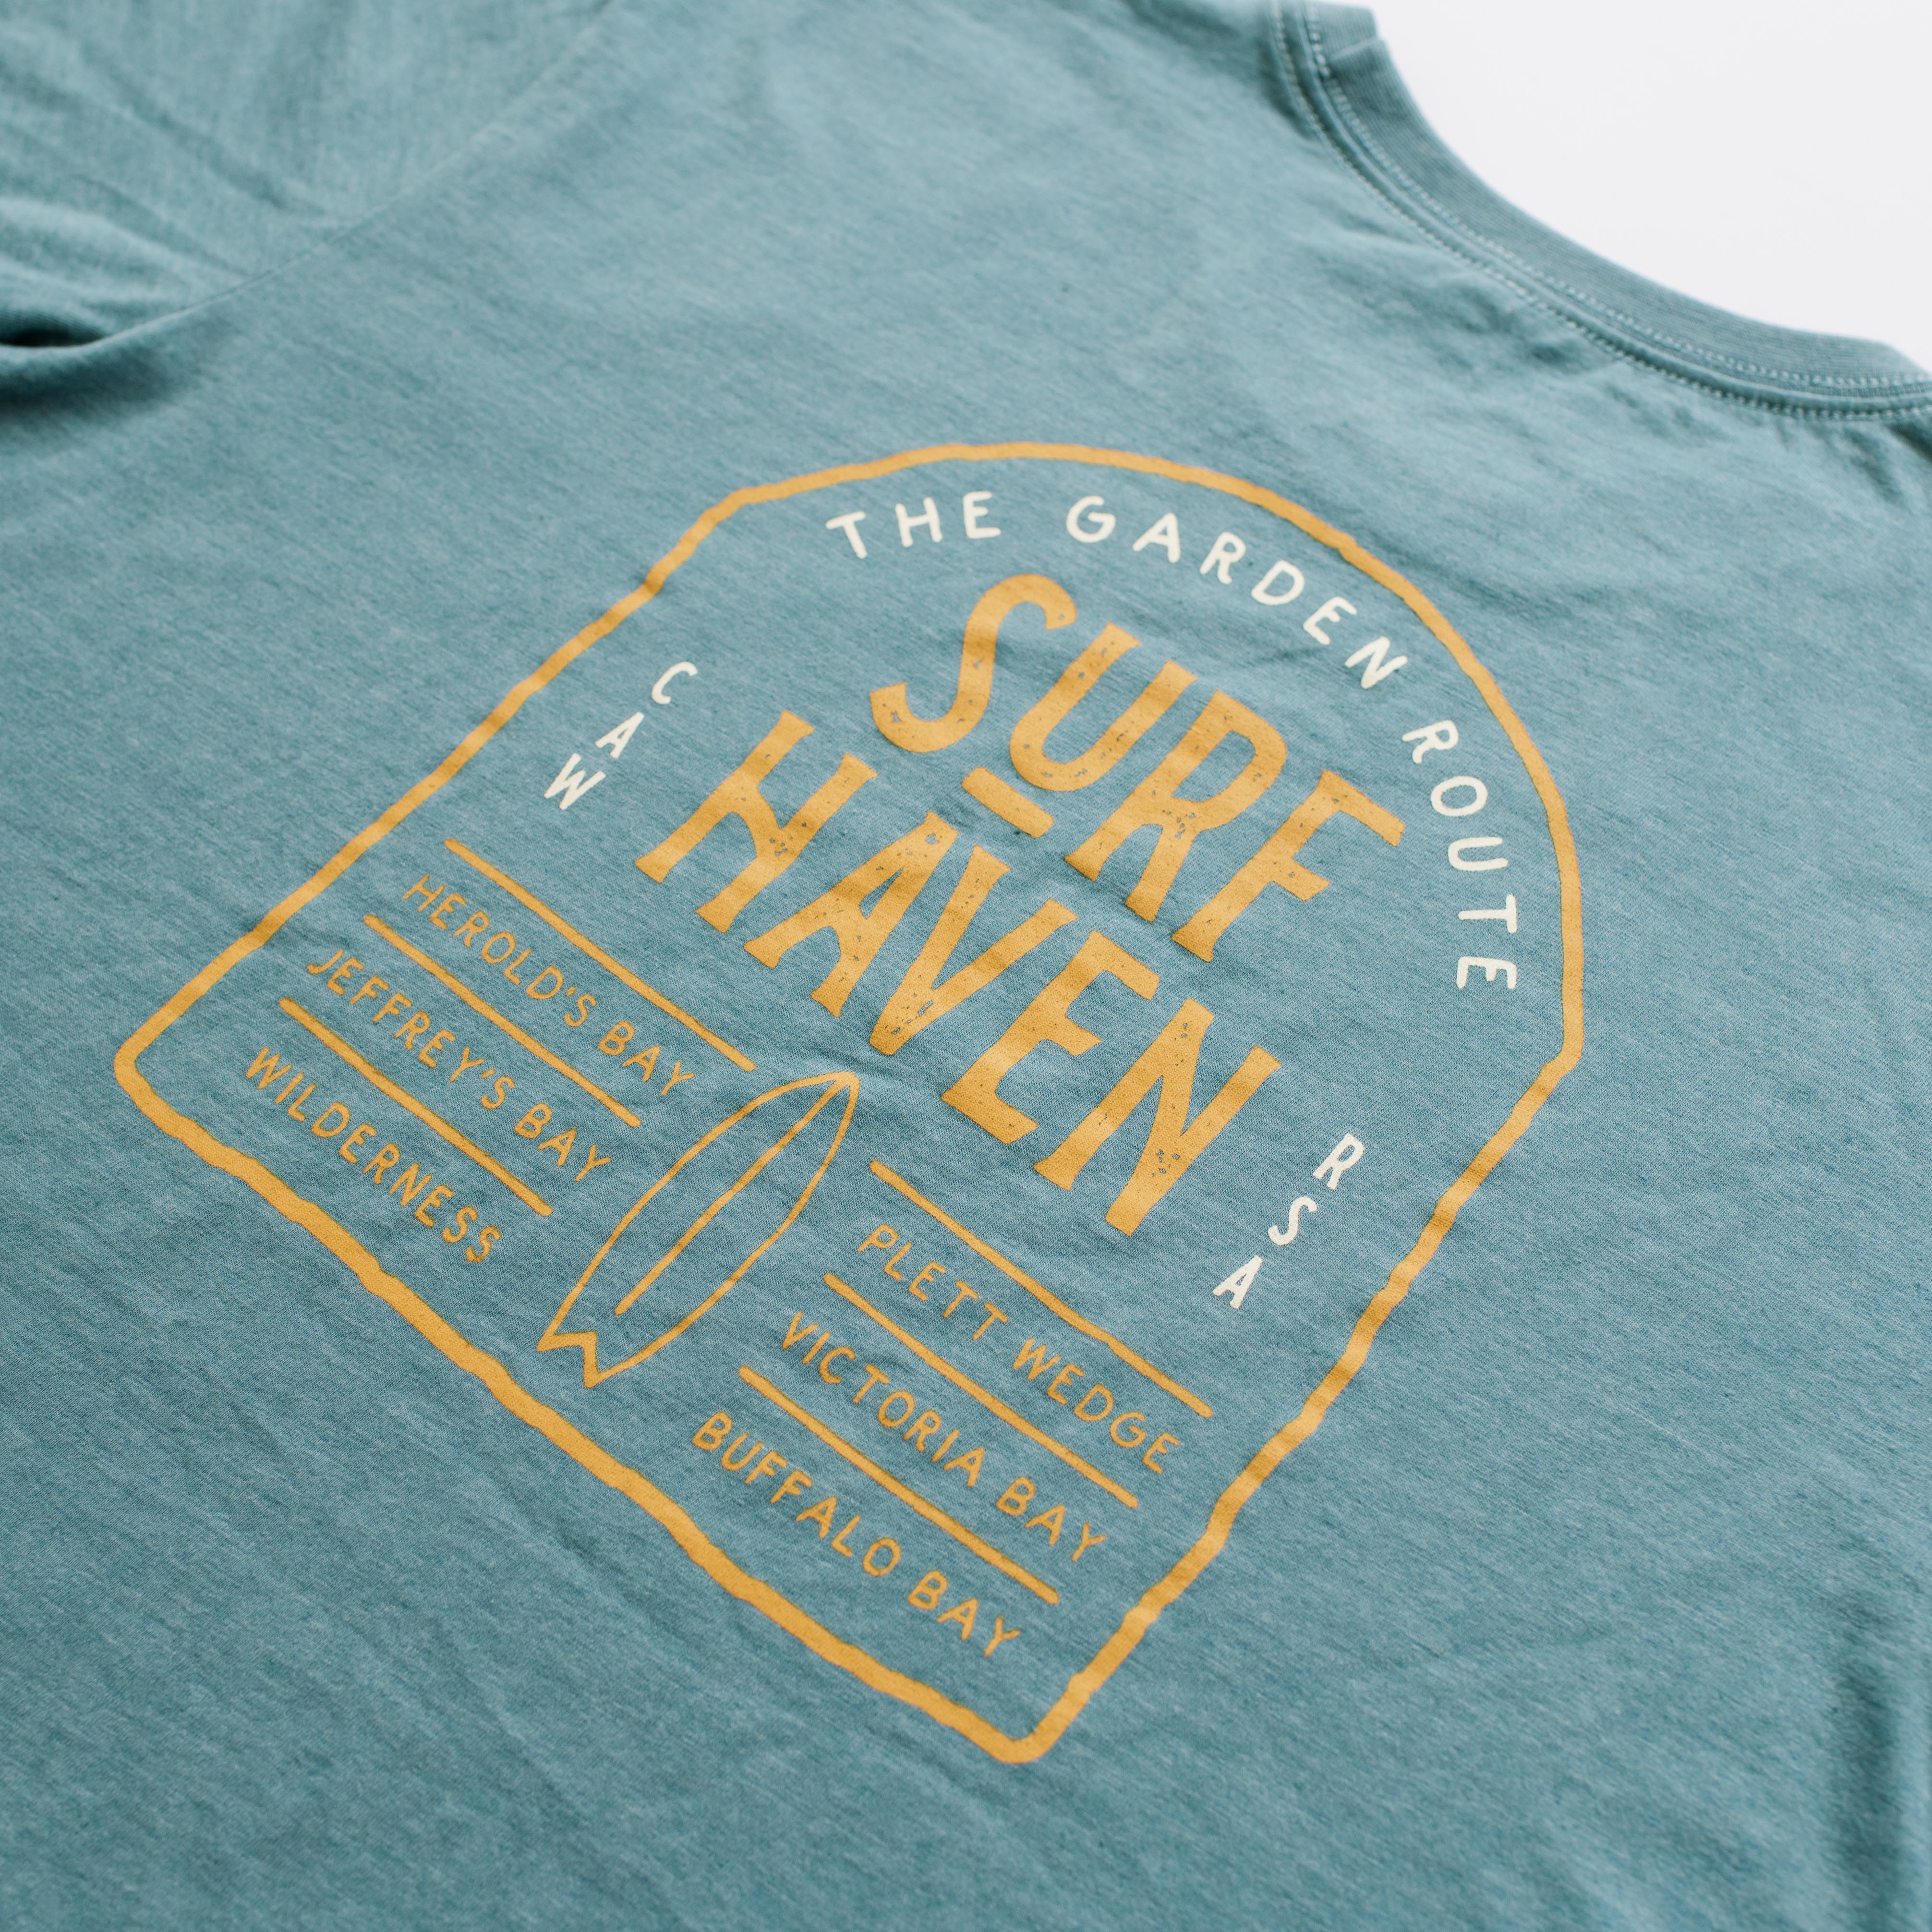 Teal Surf Haven T-Shirt - Stokedthebrand. Lifestyle products for outdoor adventures. Made in South Africa